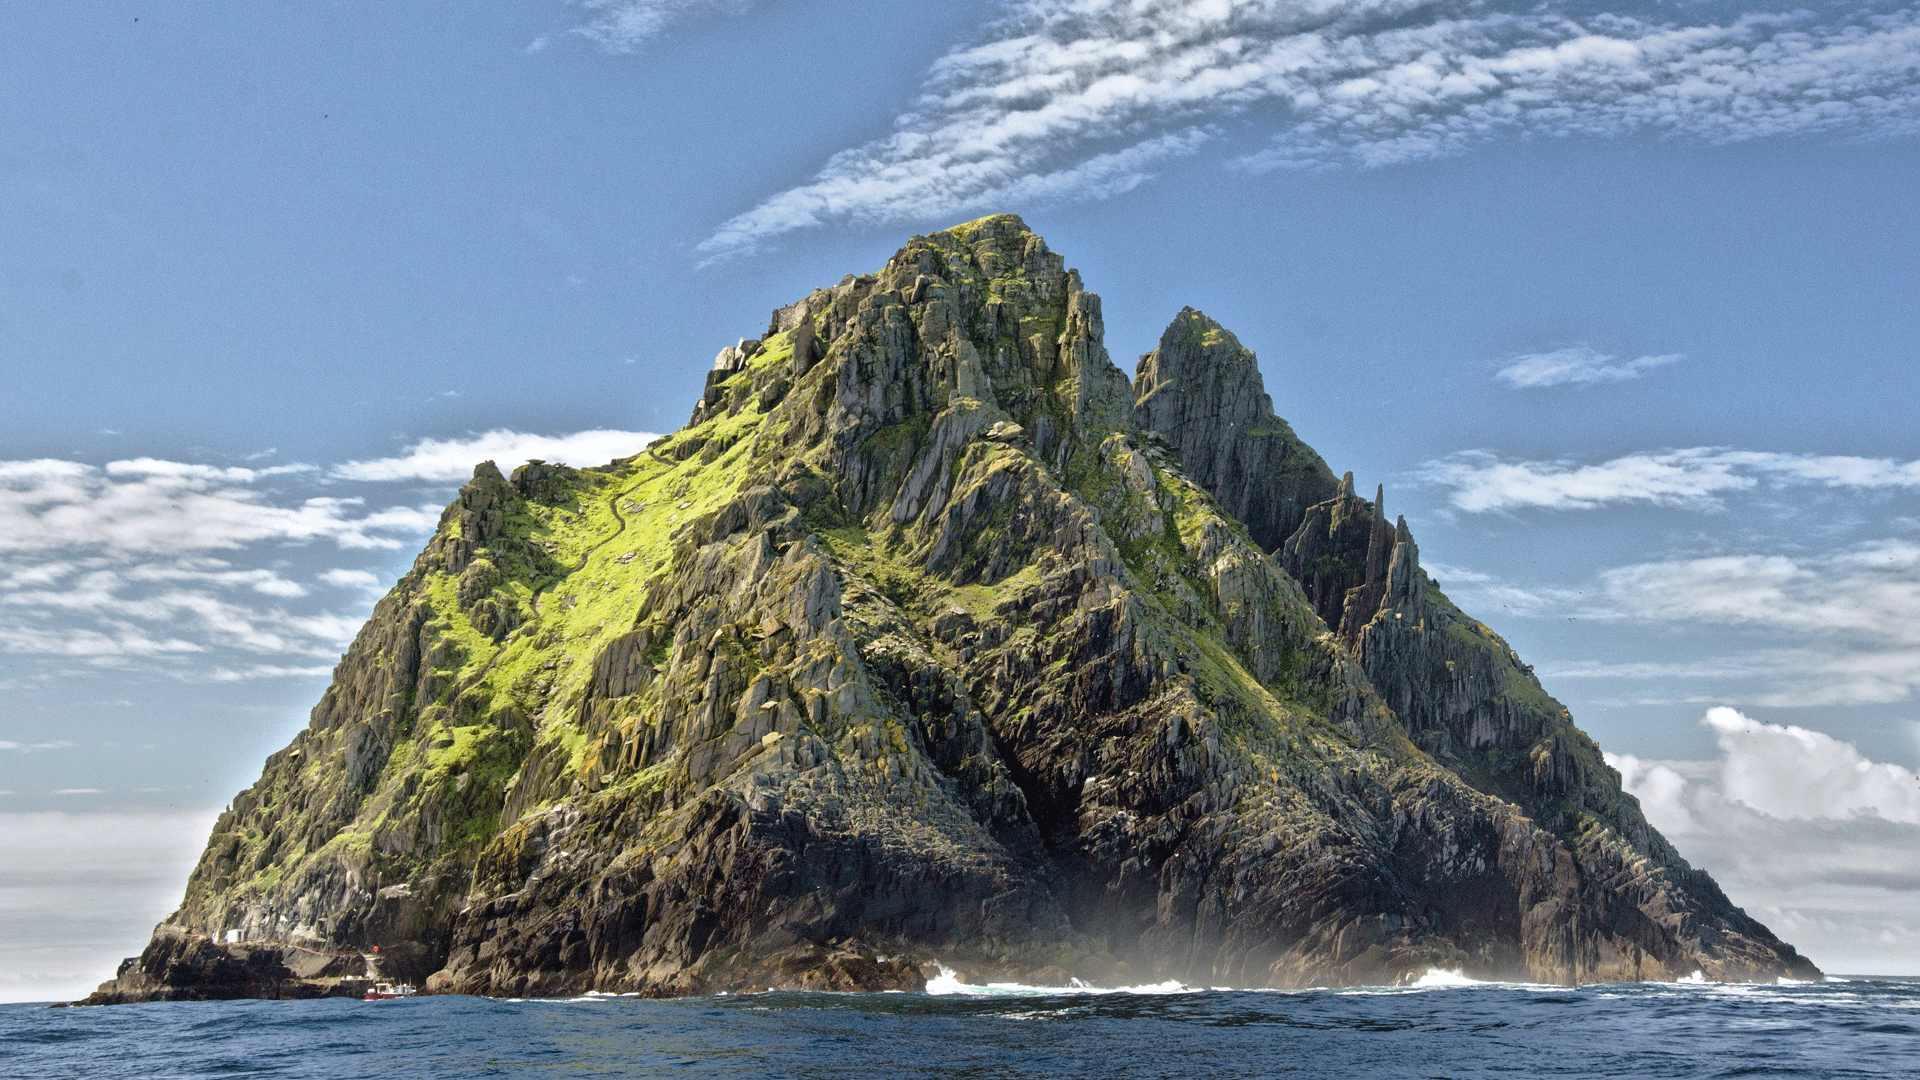 Skellig Michael is the setting for Haven by Emma Donoghue